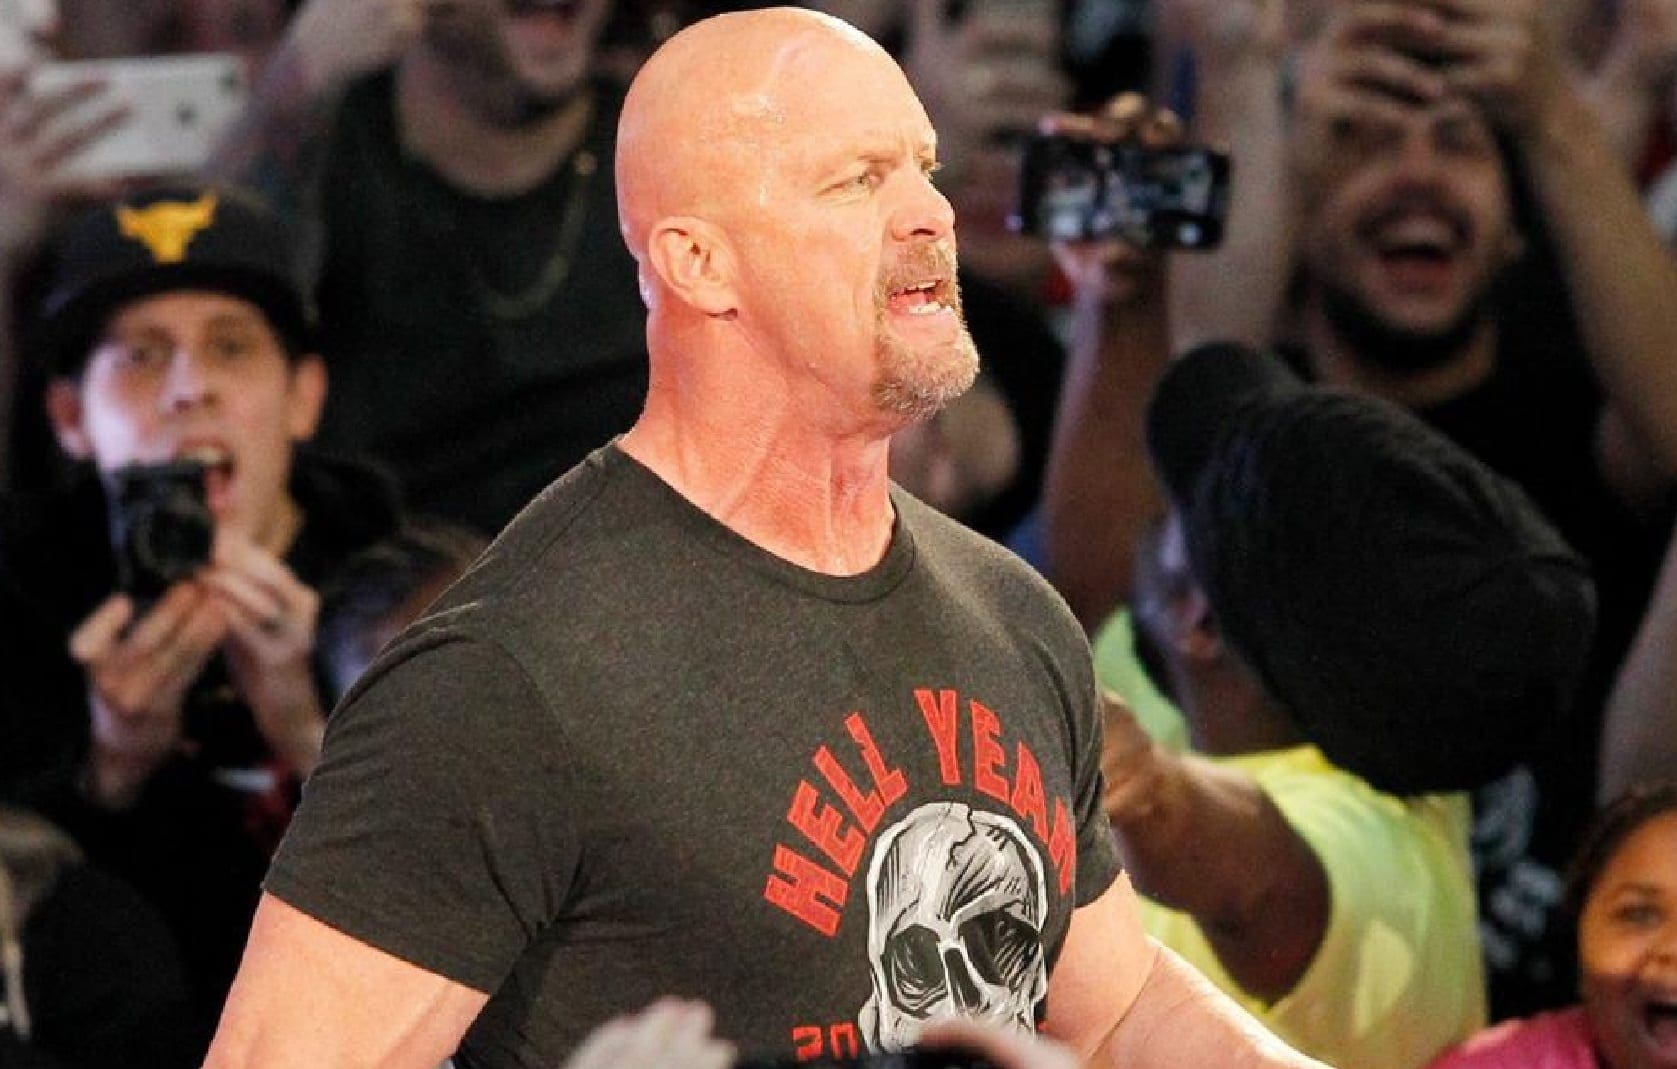 Steve Austin Reveals What Current WWE Superstars He Wants To Wrestle